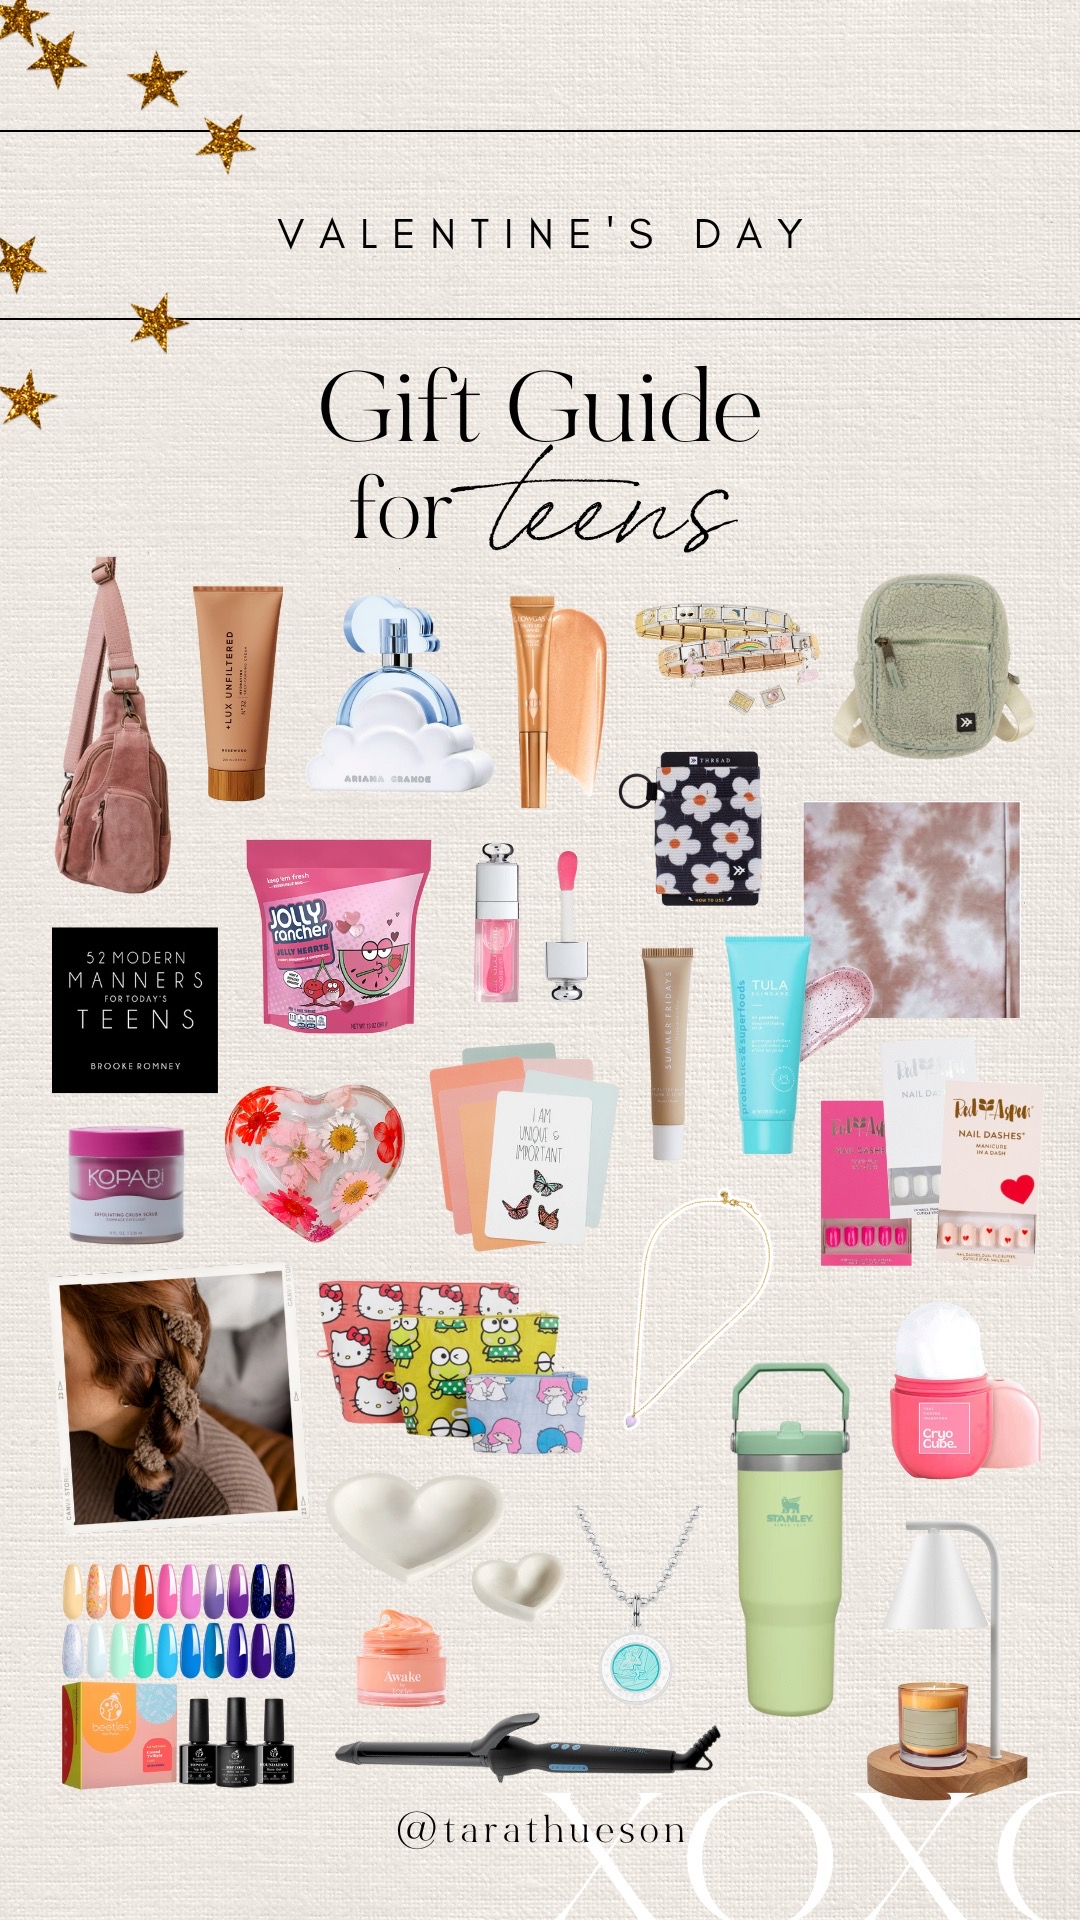 10 Great Valentine's Gift Ideas for Teens and Tweens! - MomOf6